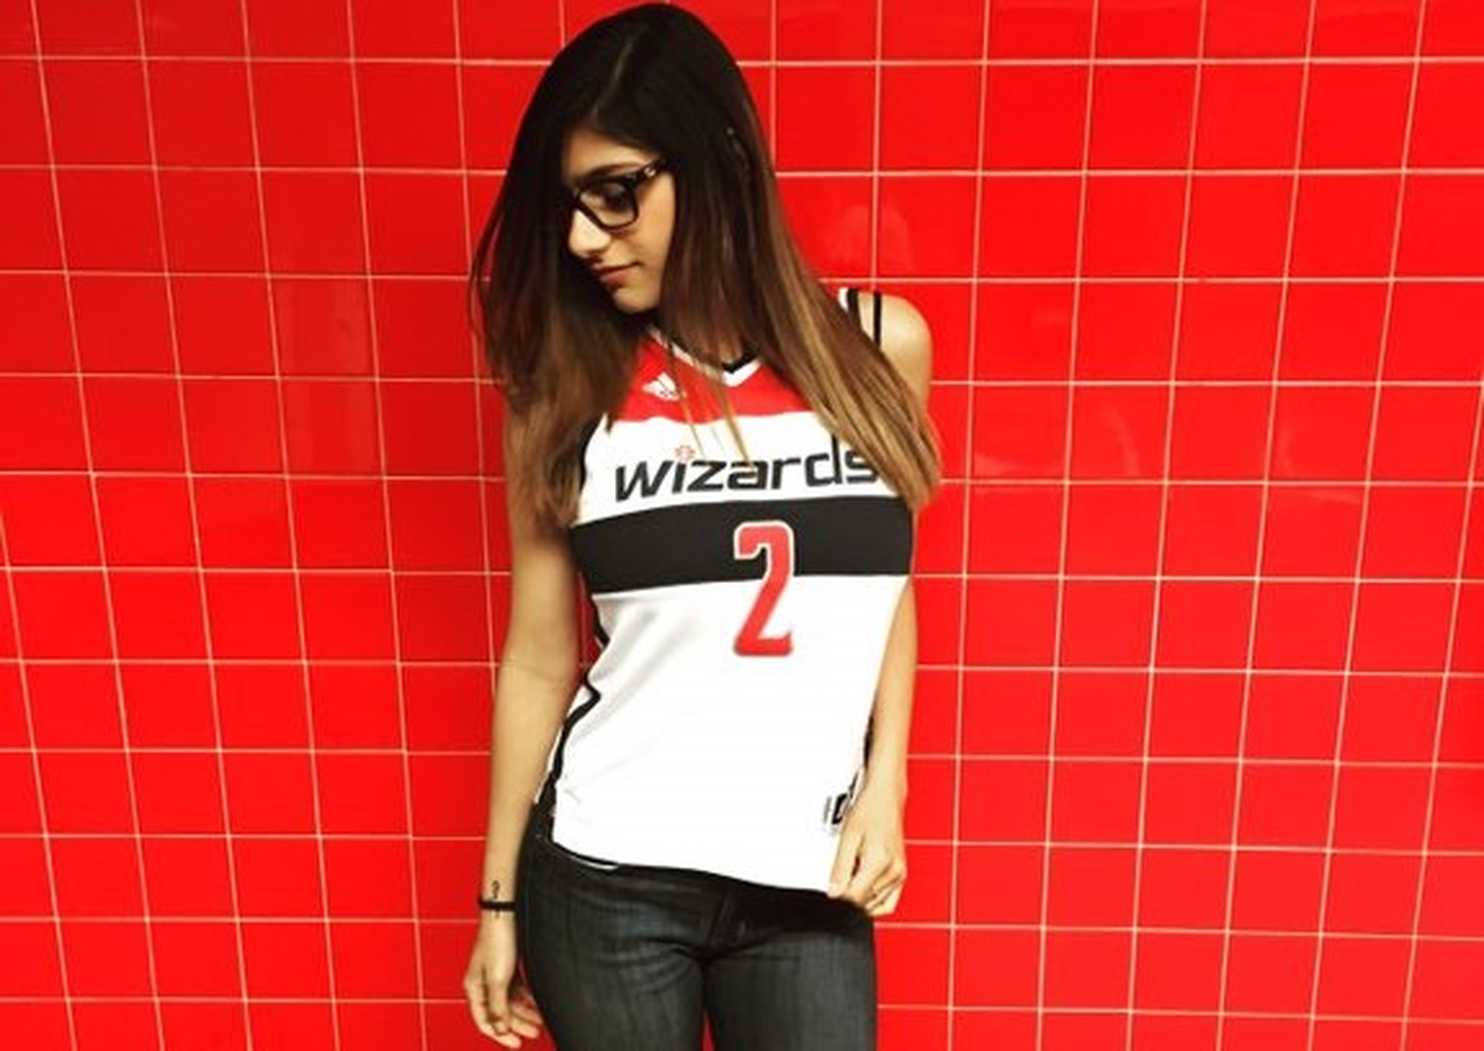 Young Mia Khalifa On Red Tiles